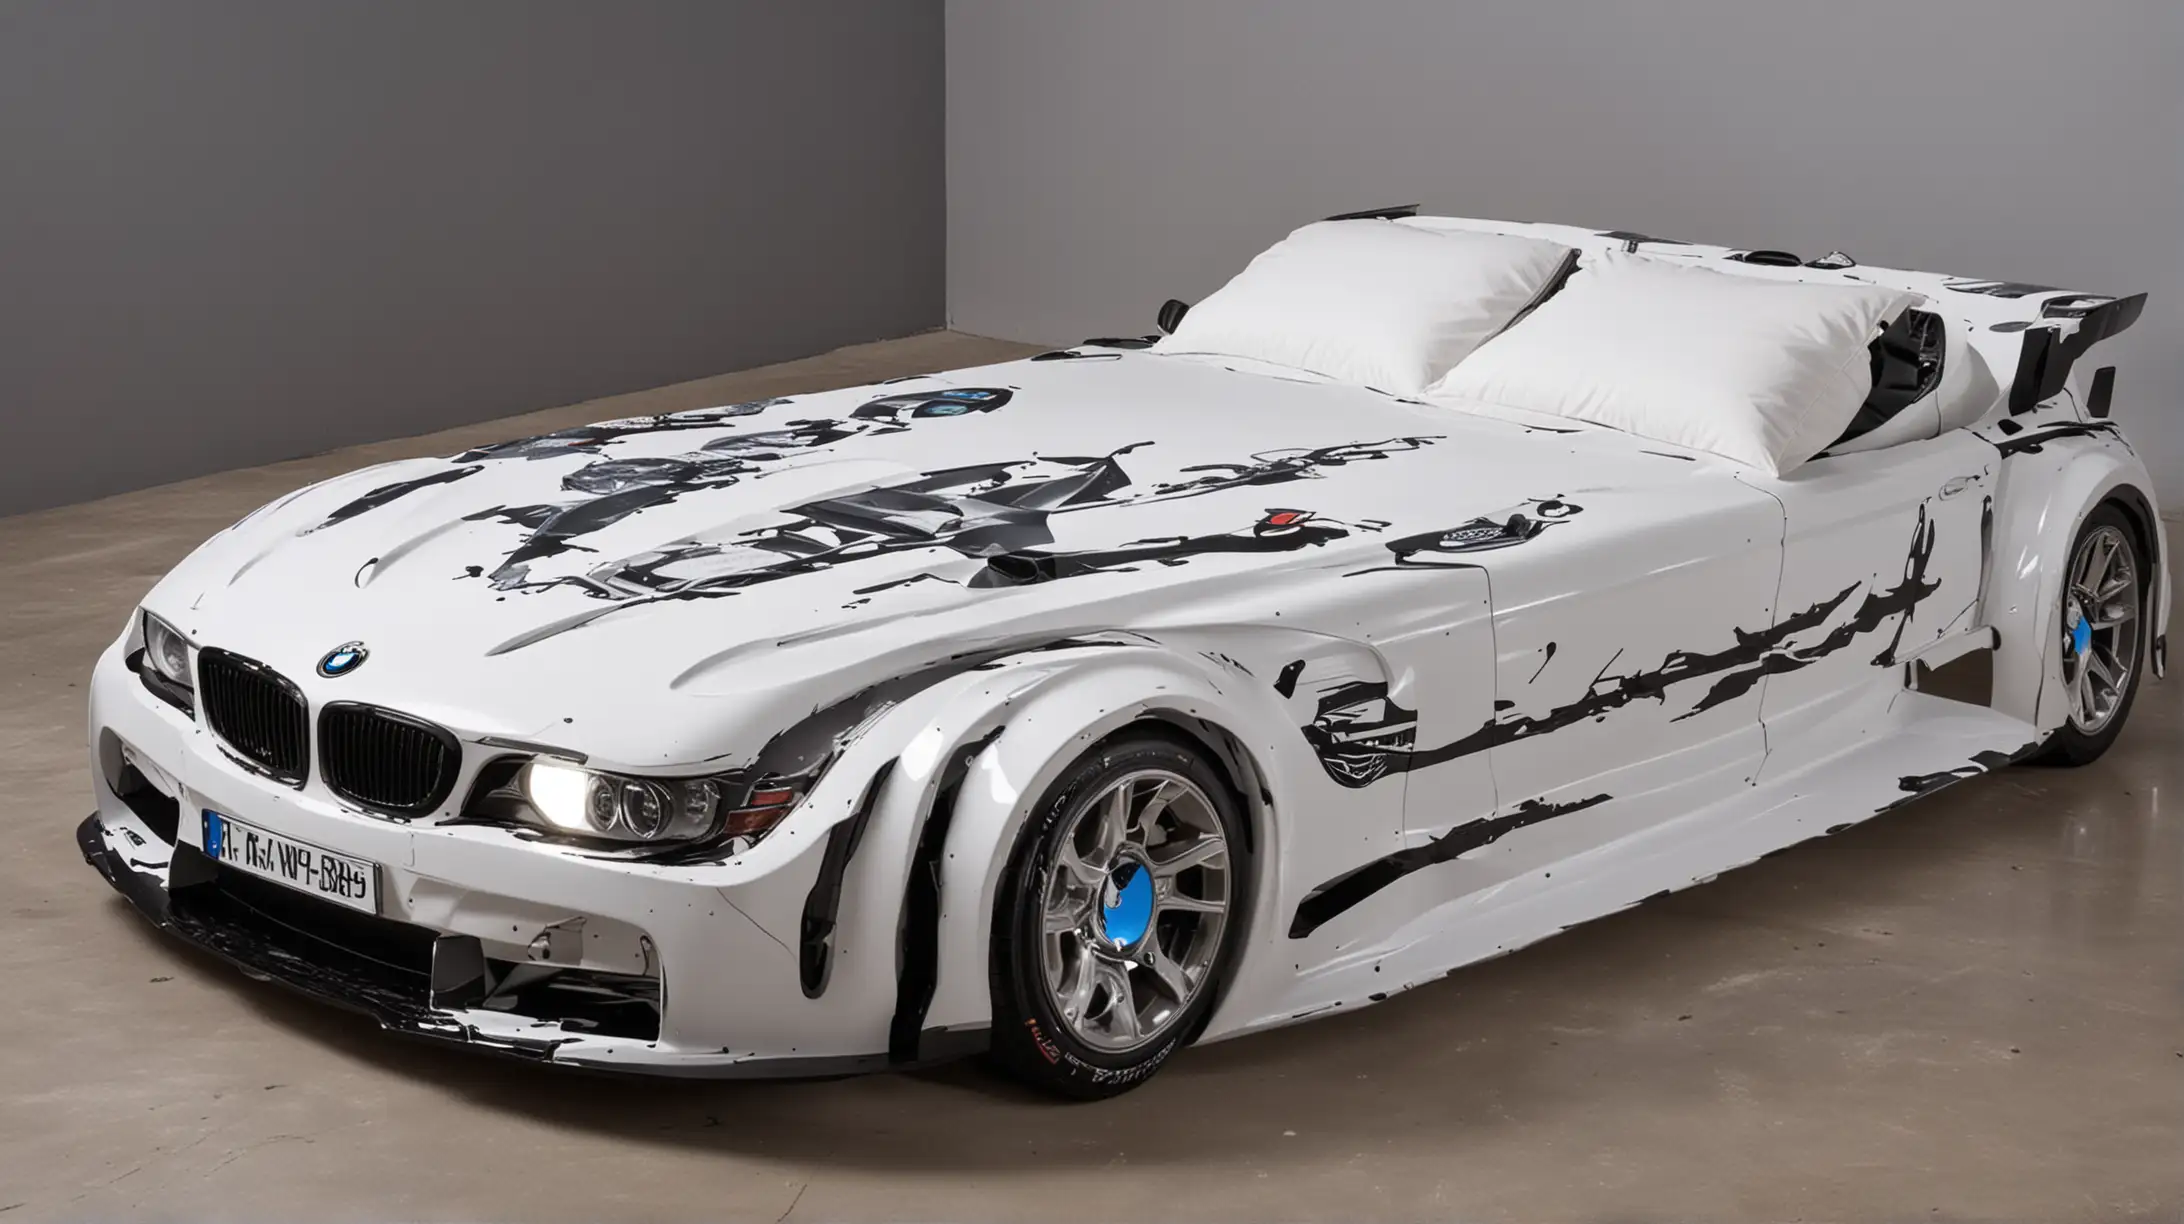 Luxurious Double Bed Shaped Like a BMW Car with Illuminated Headlights and Splash Graphics